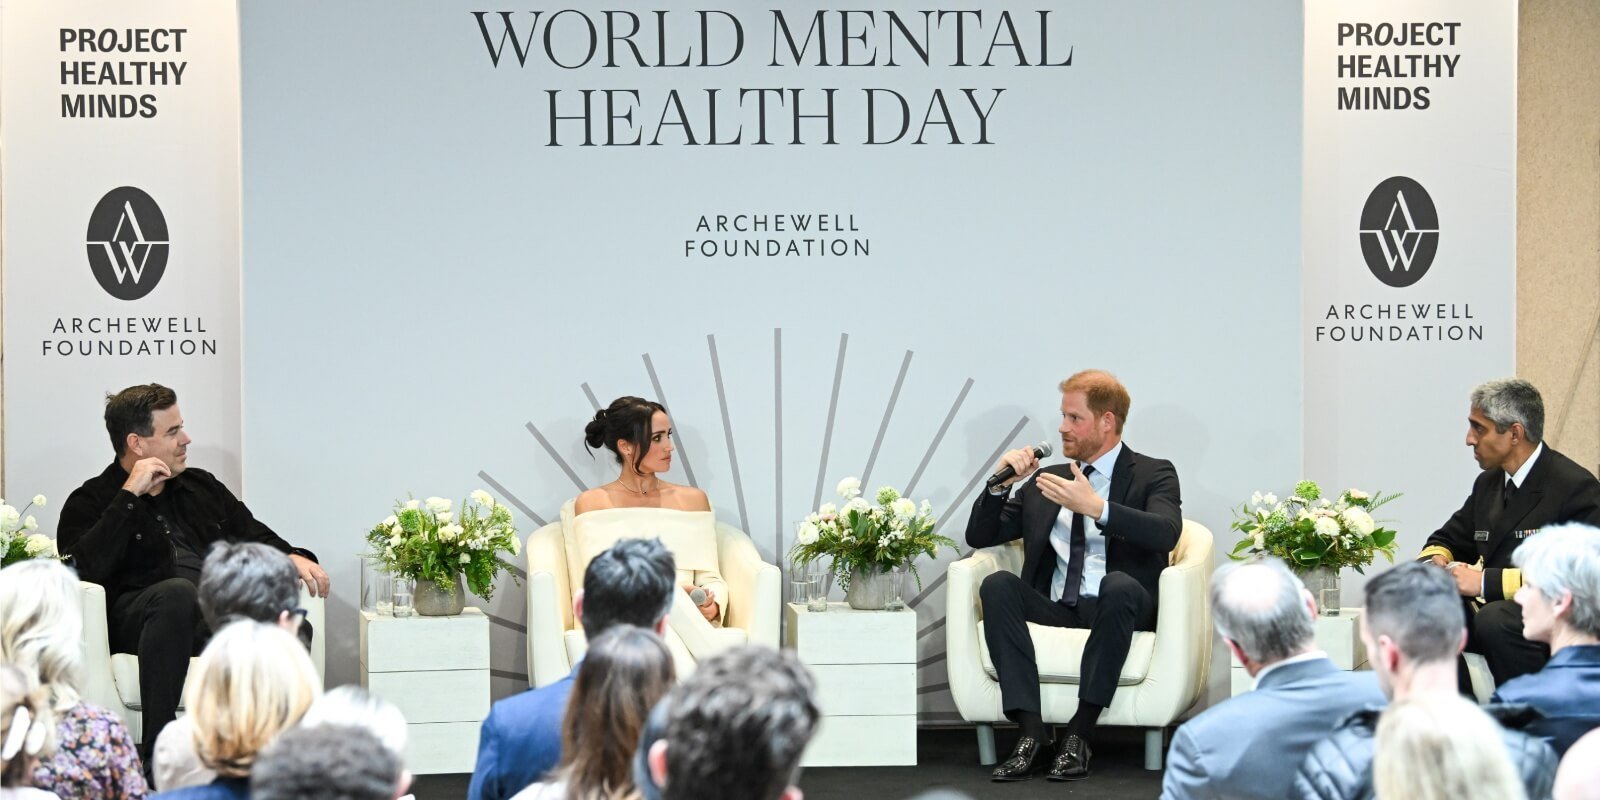 Carson Daly, Meghan Markle, Prince Harry and Dr. Vivek H. Murthy on stage for World Mental Health day.